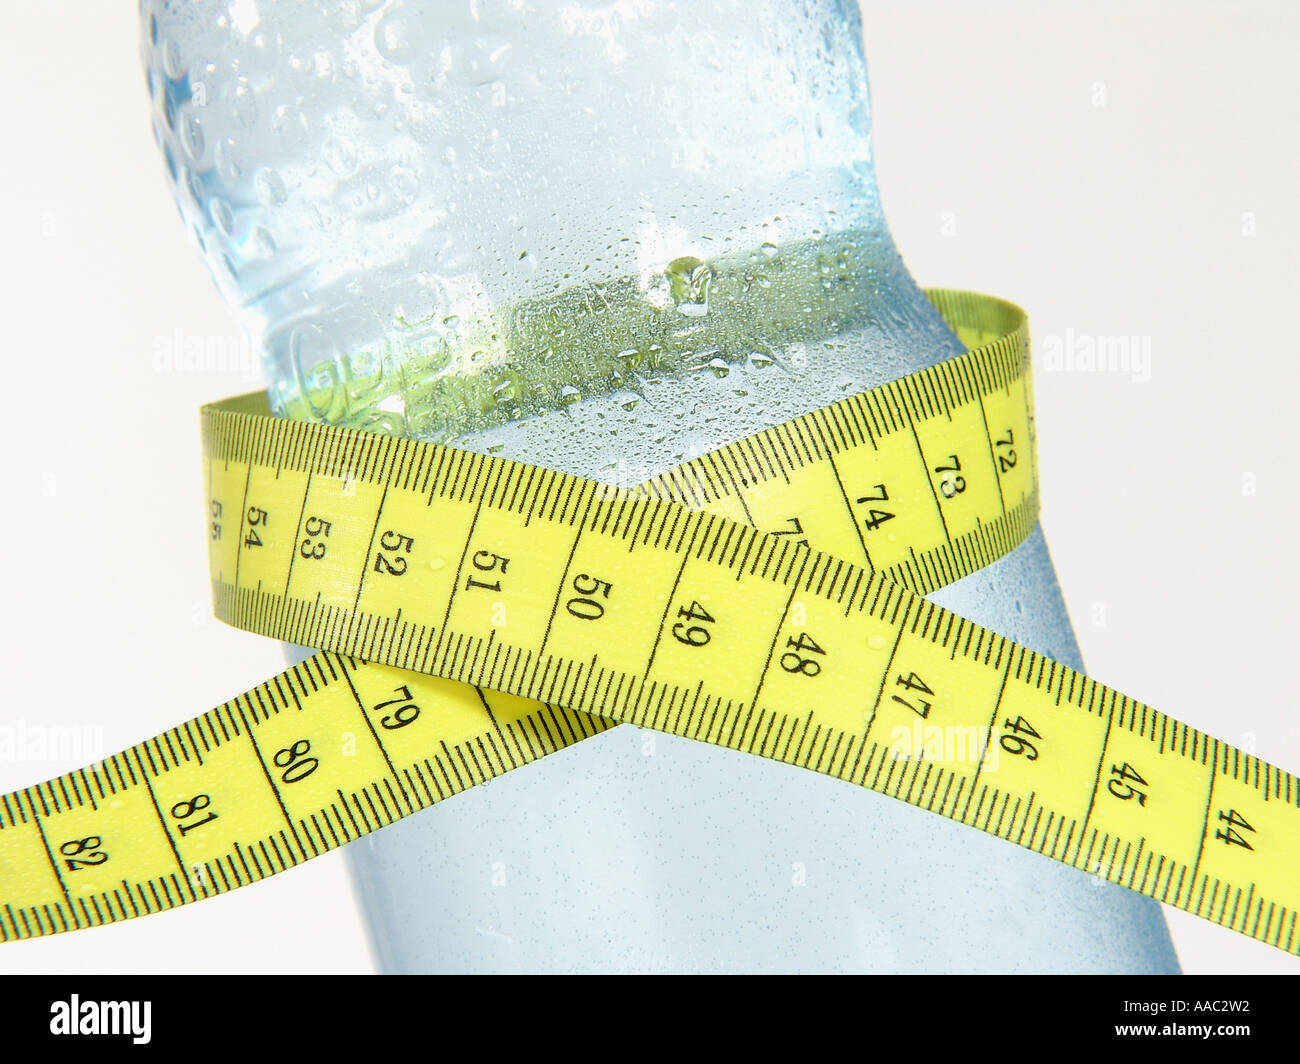 Mineral water bottle with tape measure Stock Photo